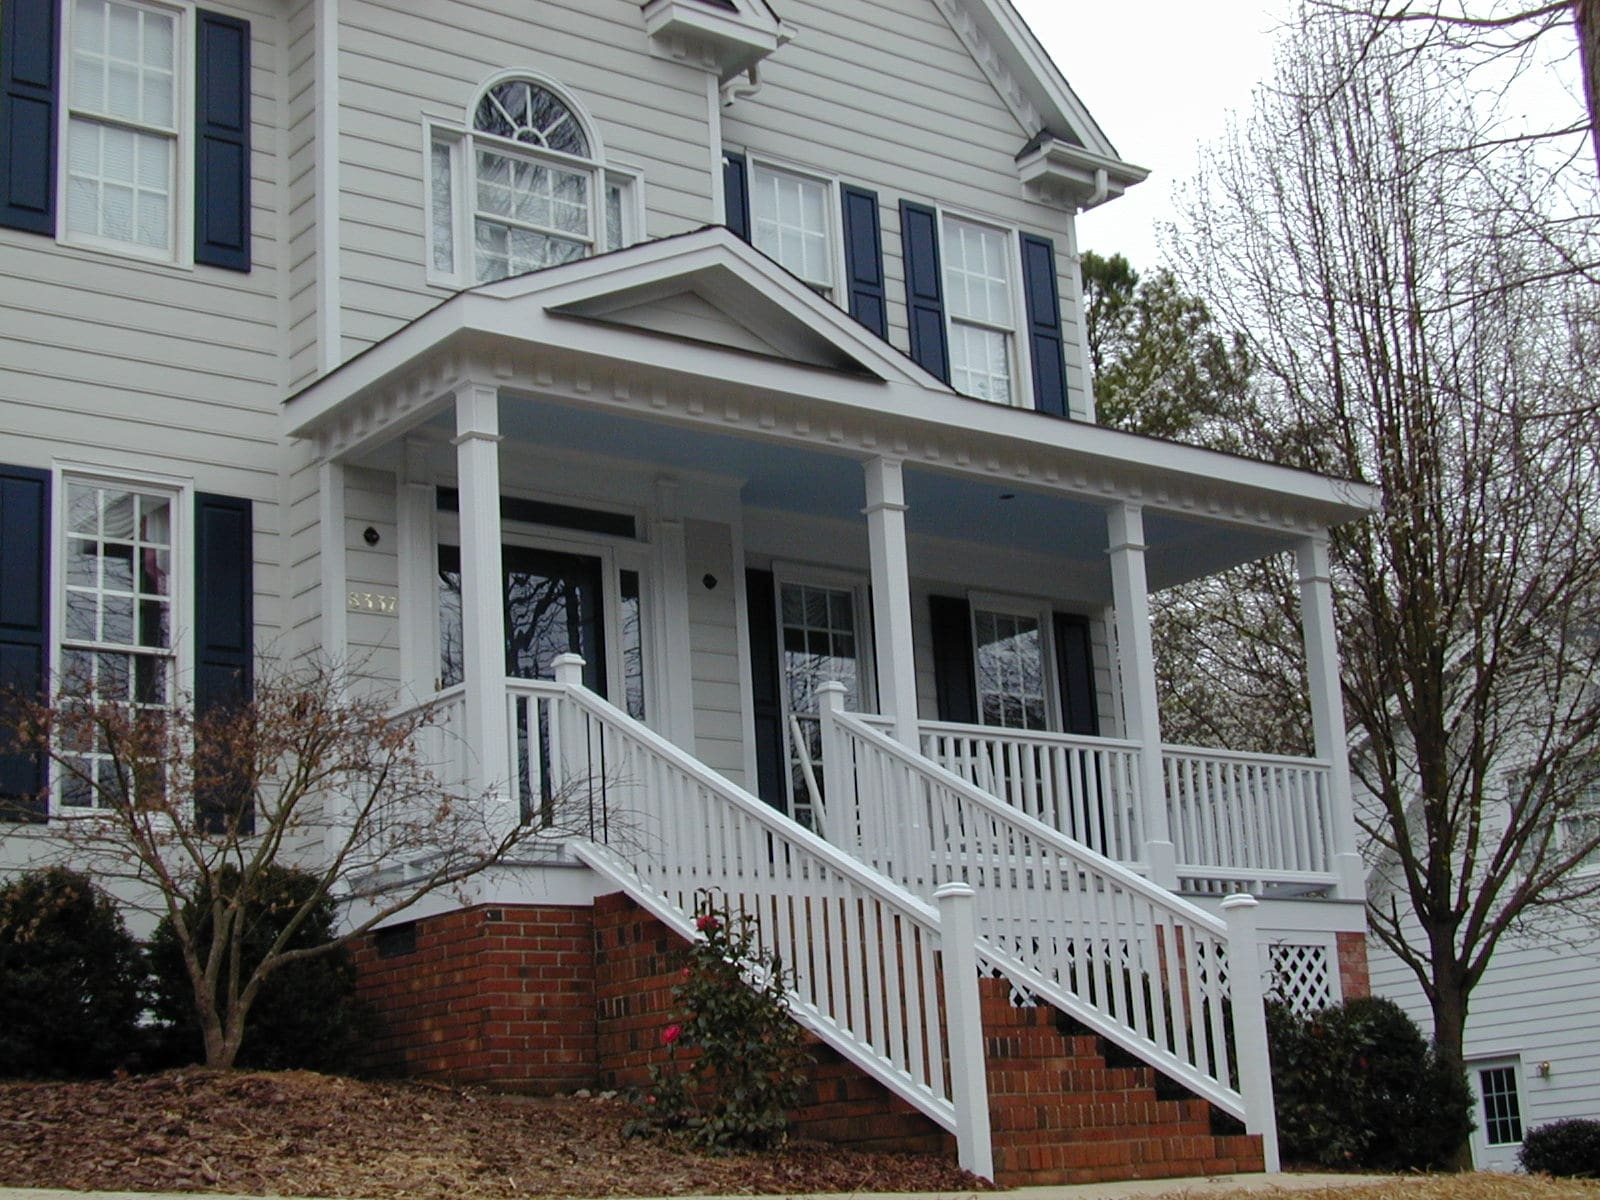 A house exterior after a front porch addition.